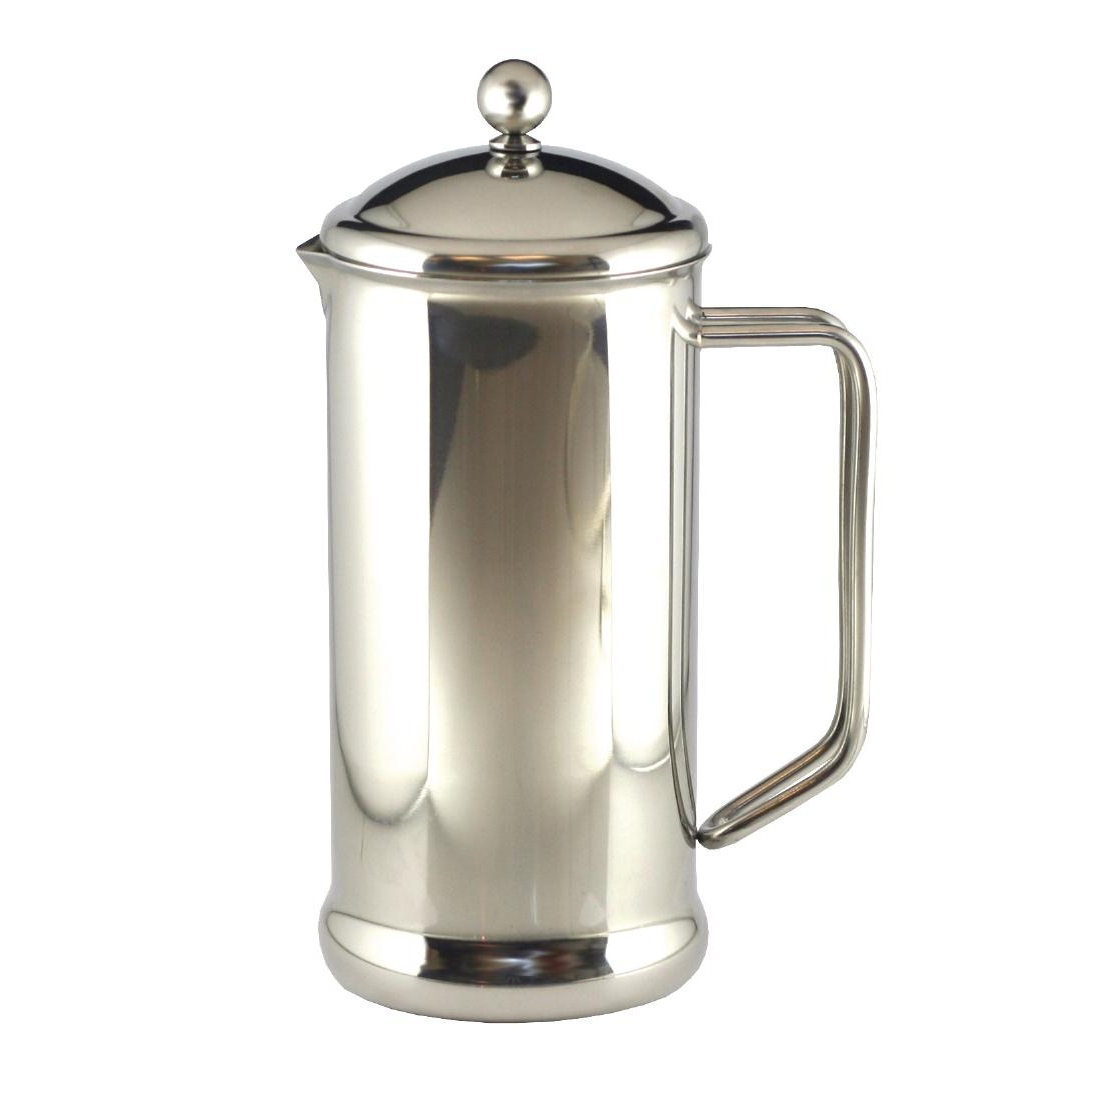 Cafetiere Stainless Steel Polished Finish 6 Cup